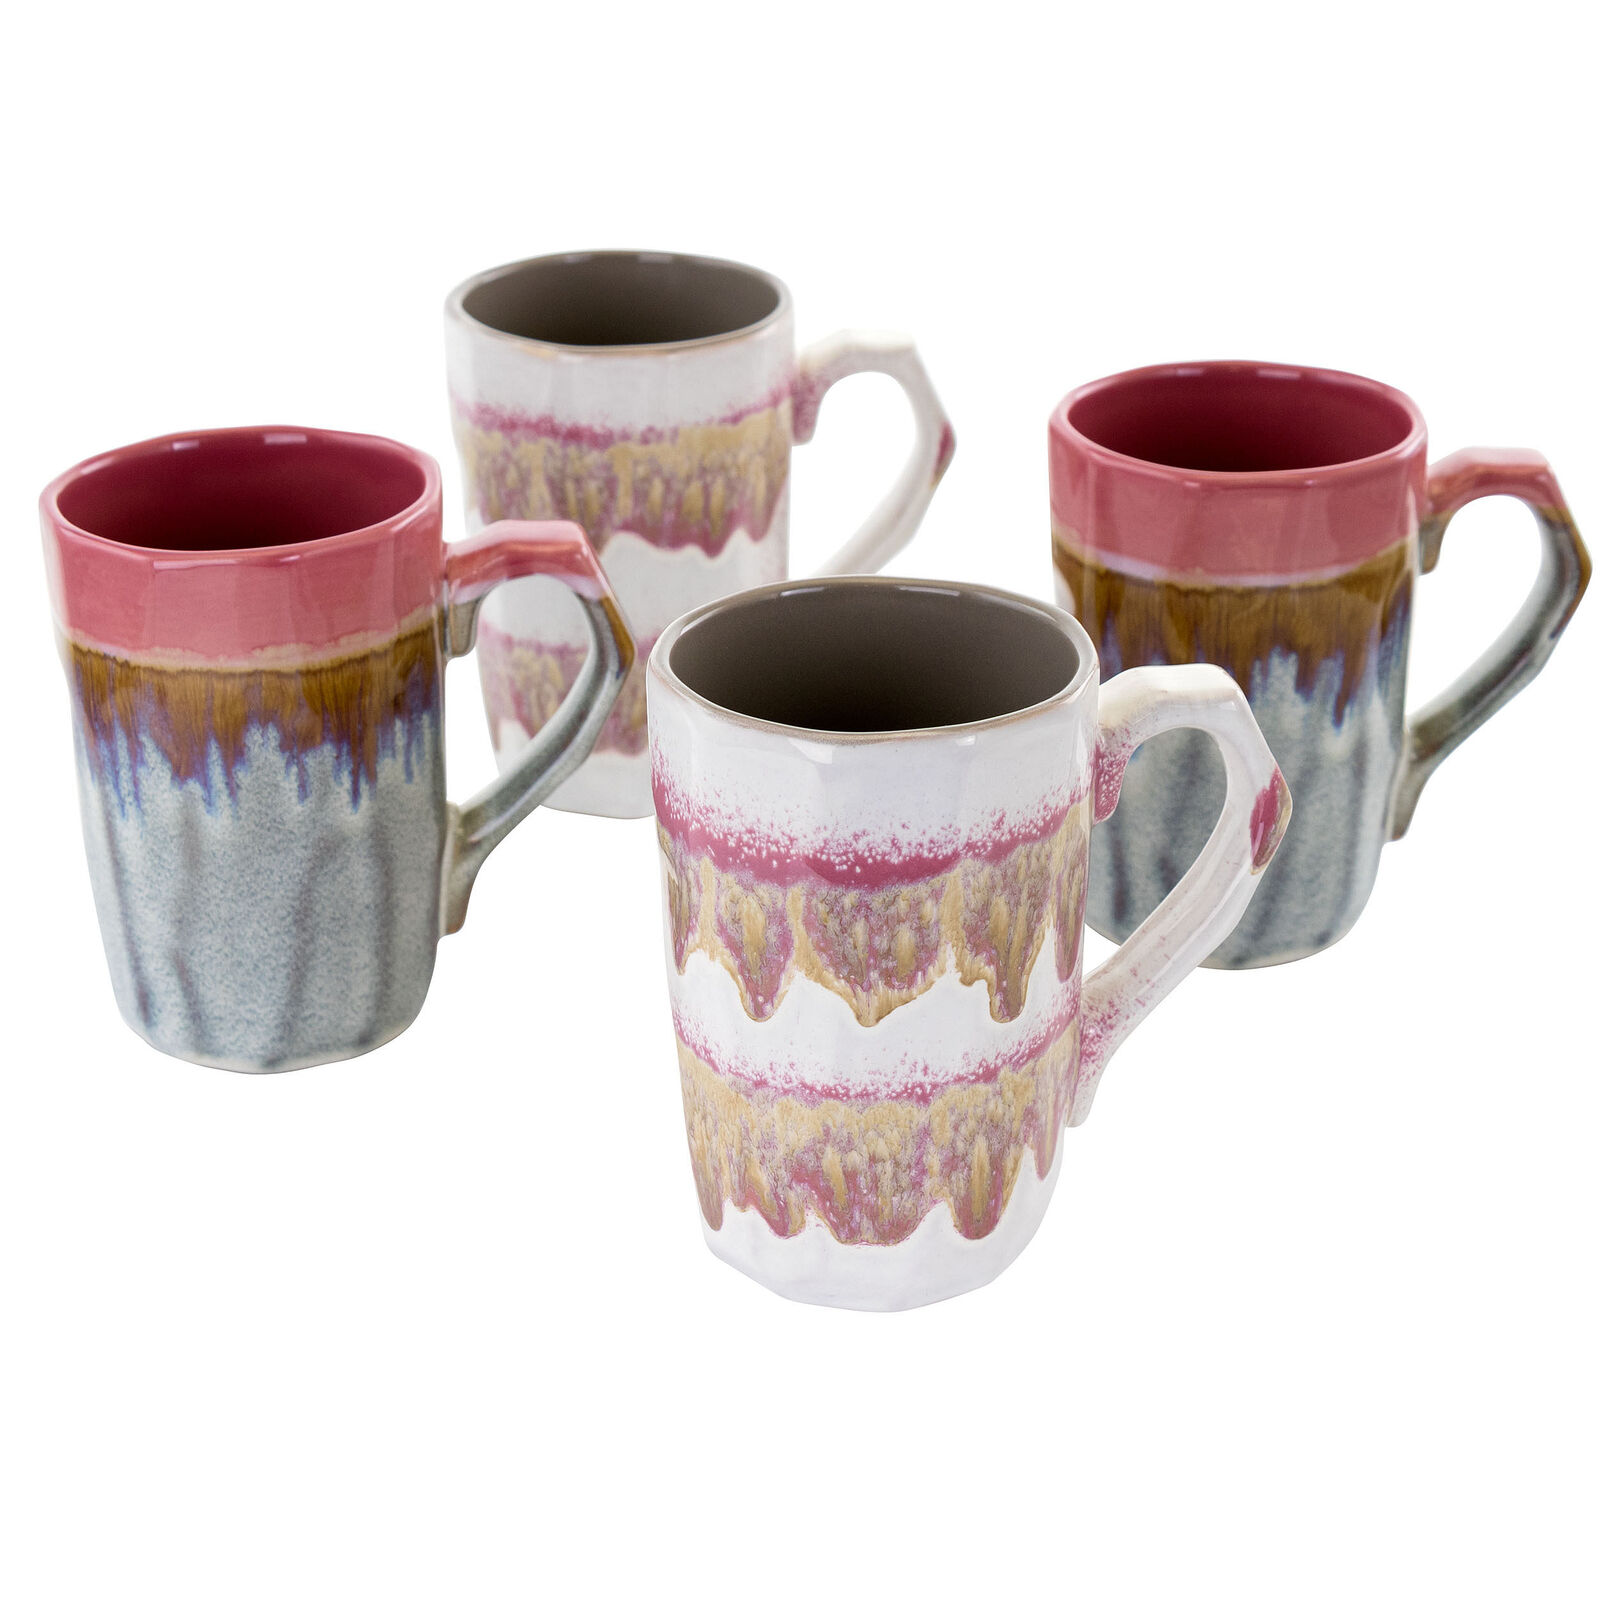 Gibson Home Everest Glaze 4 Piece 12 Ounce Stoneware Mug Set in Assorted Colors